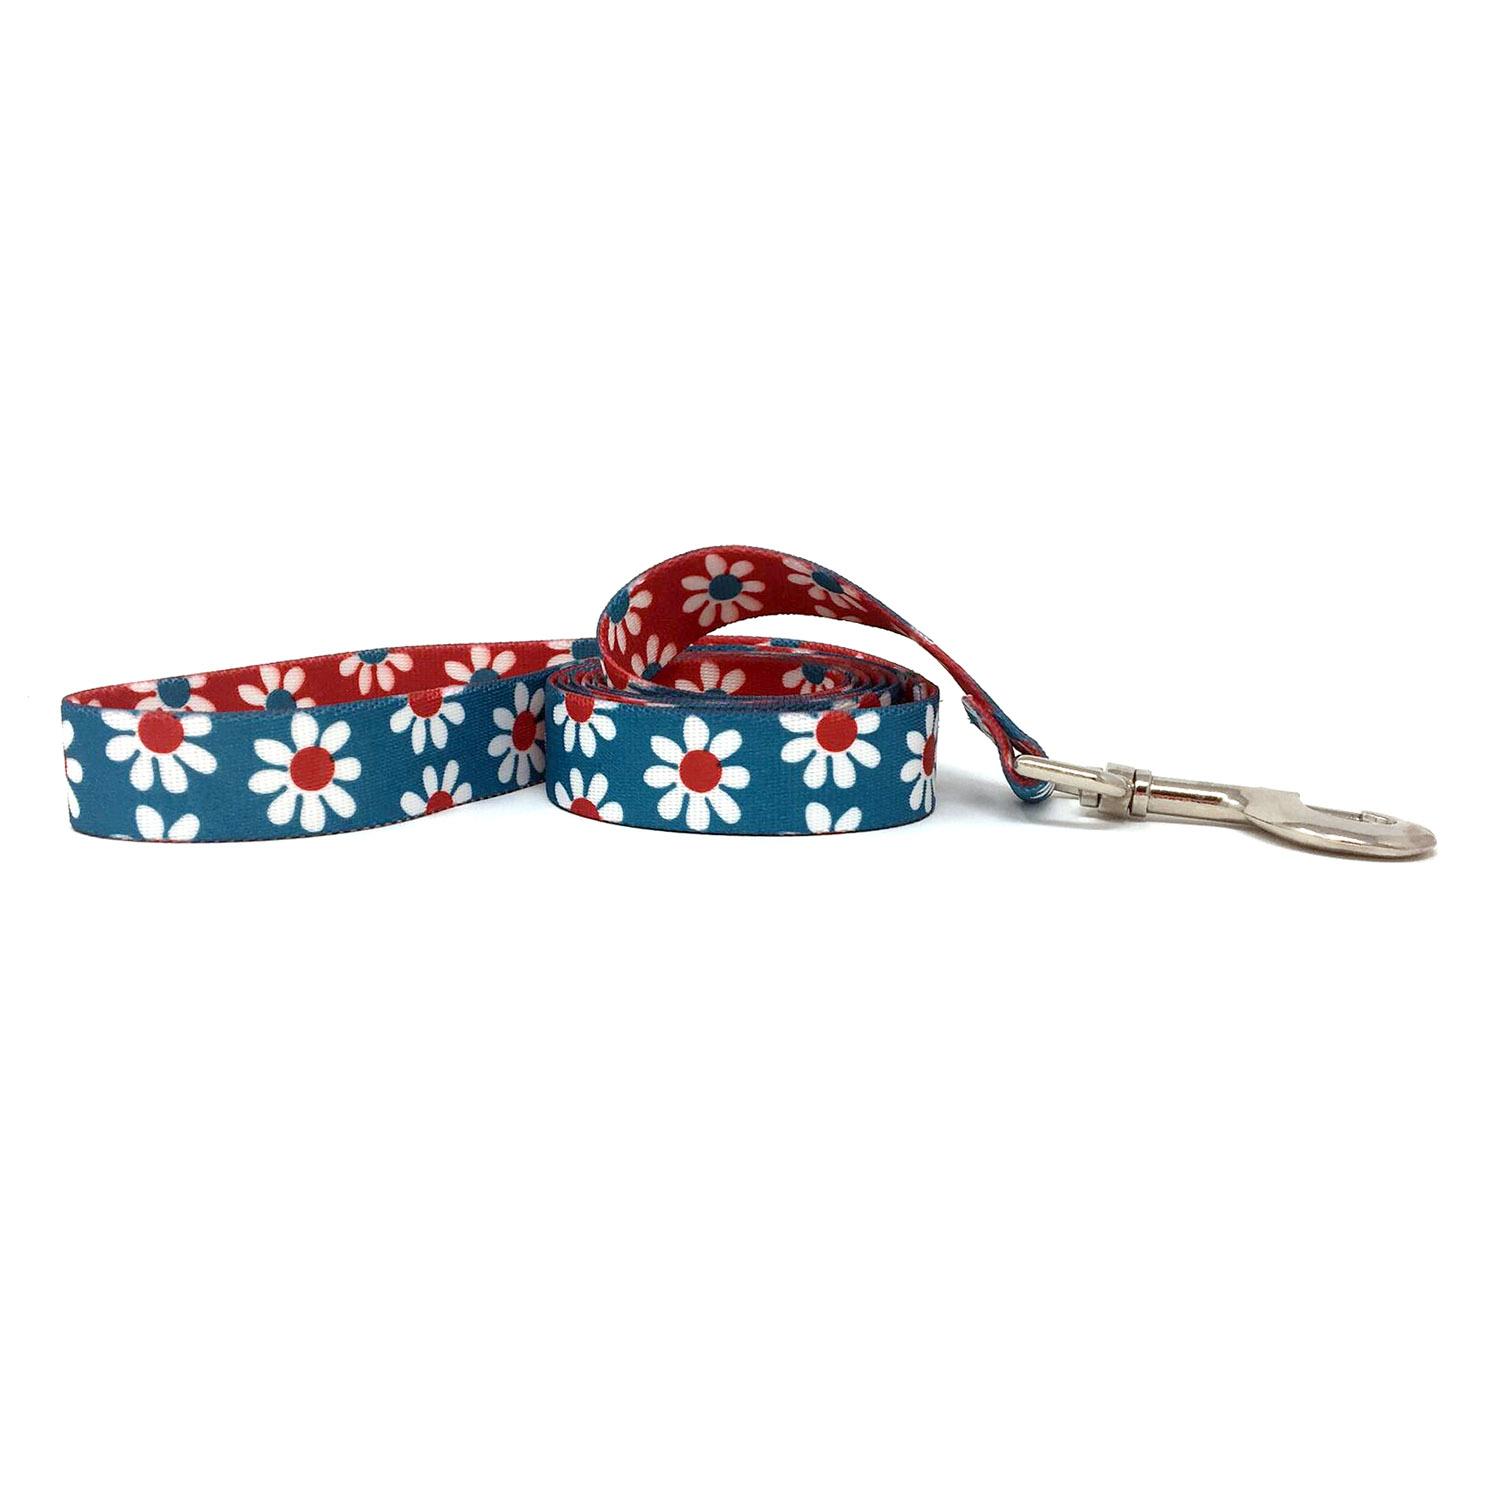 Mix and Match Daisy Dog Leash by Yellow Dog - Teal and Red